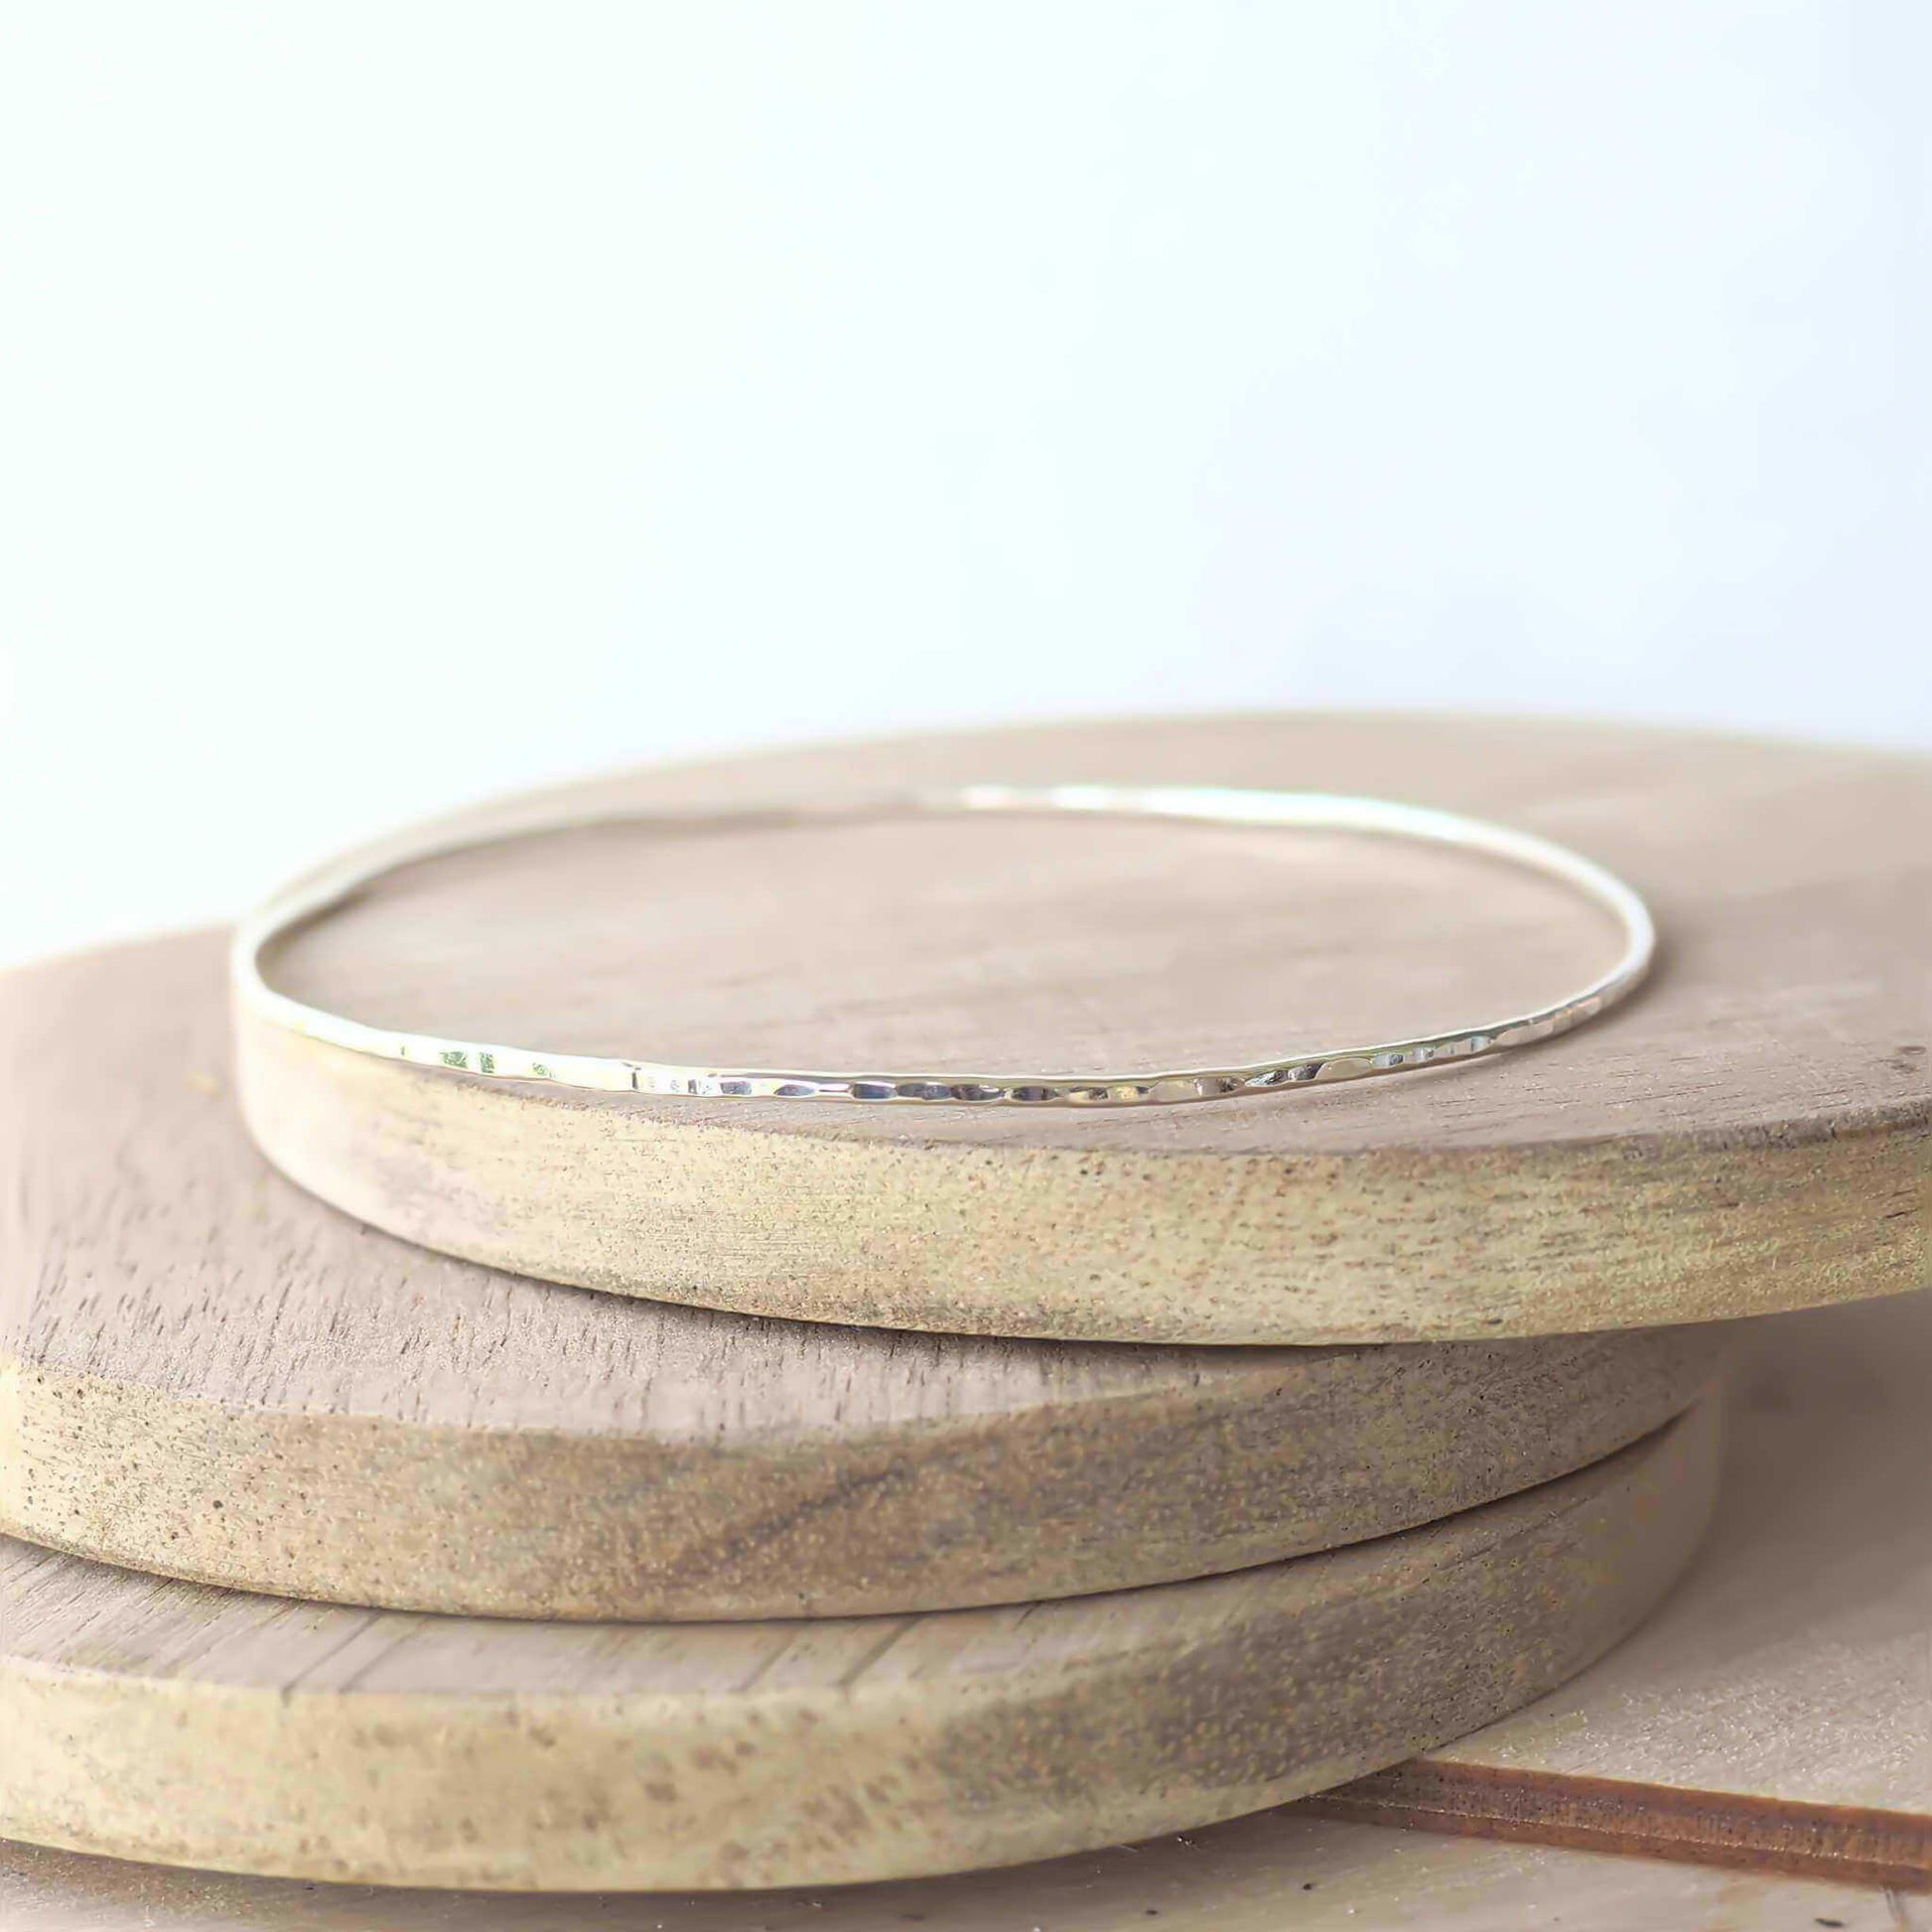 Single Sterling Silver thin hammered bangle handmade in the UK by maram jewellery. pictured on a wood background so that the hammered texture is more visible